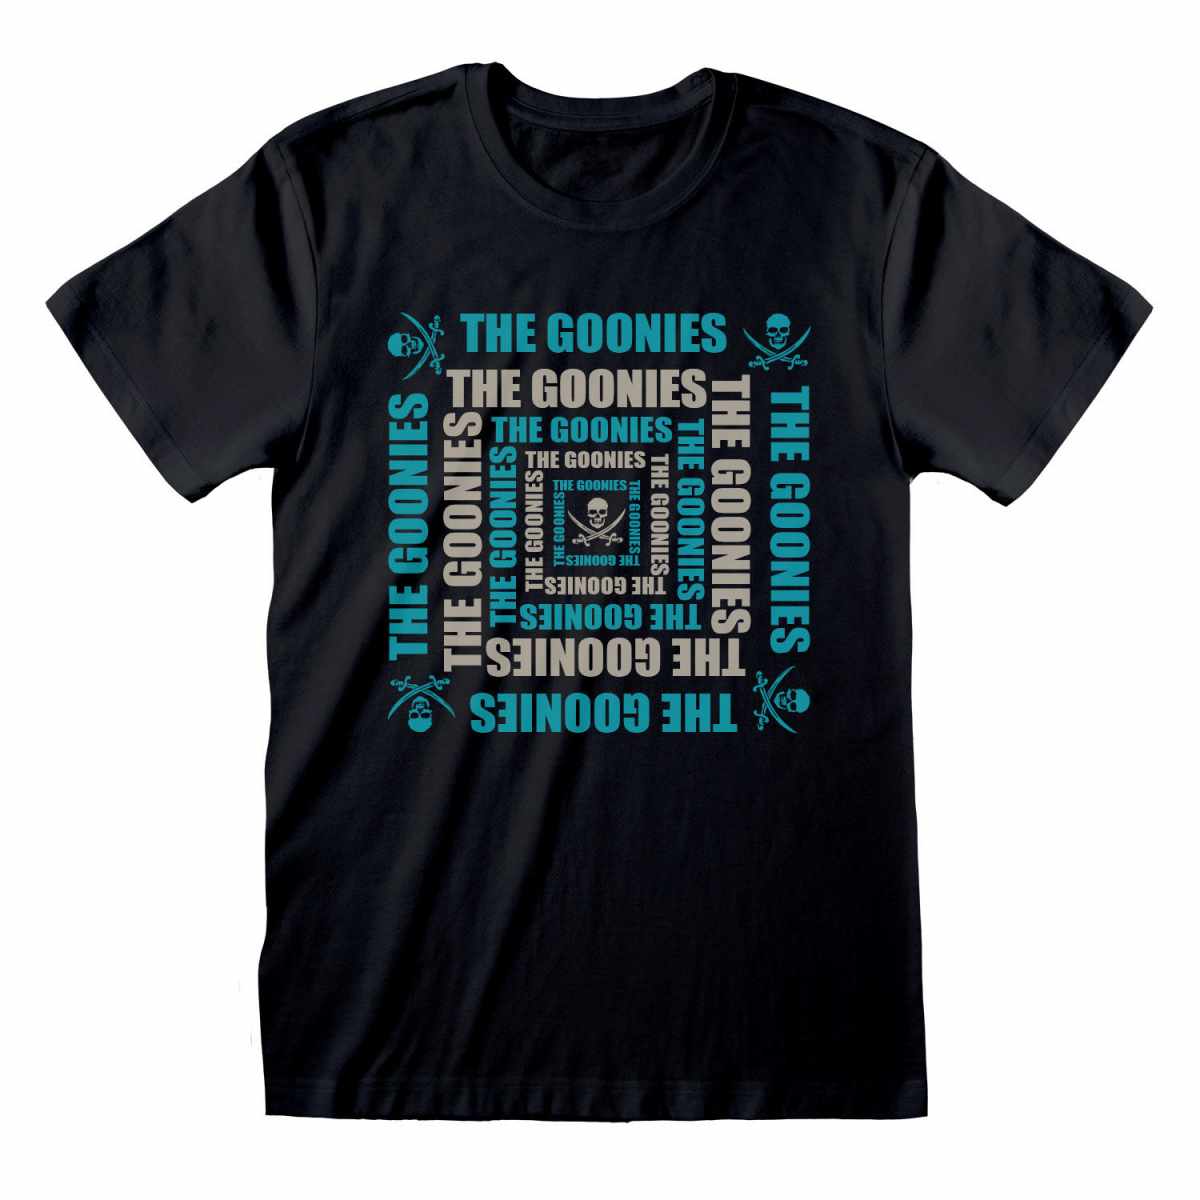 The Goonies Square Names T-Shirt